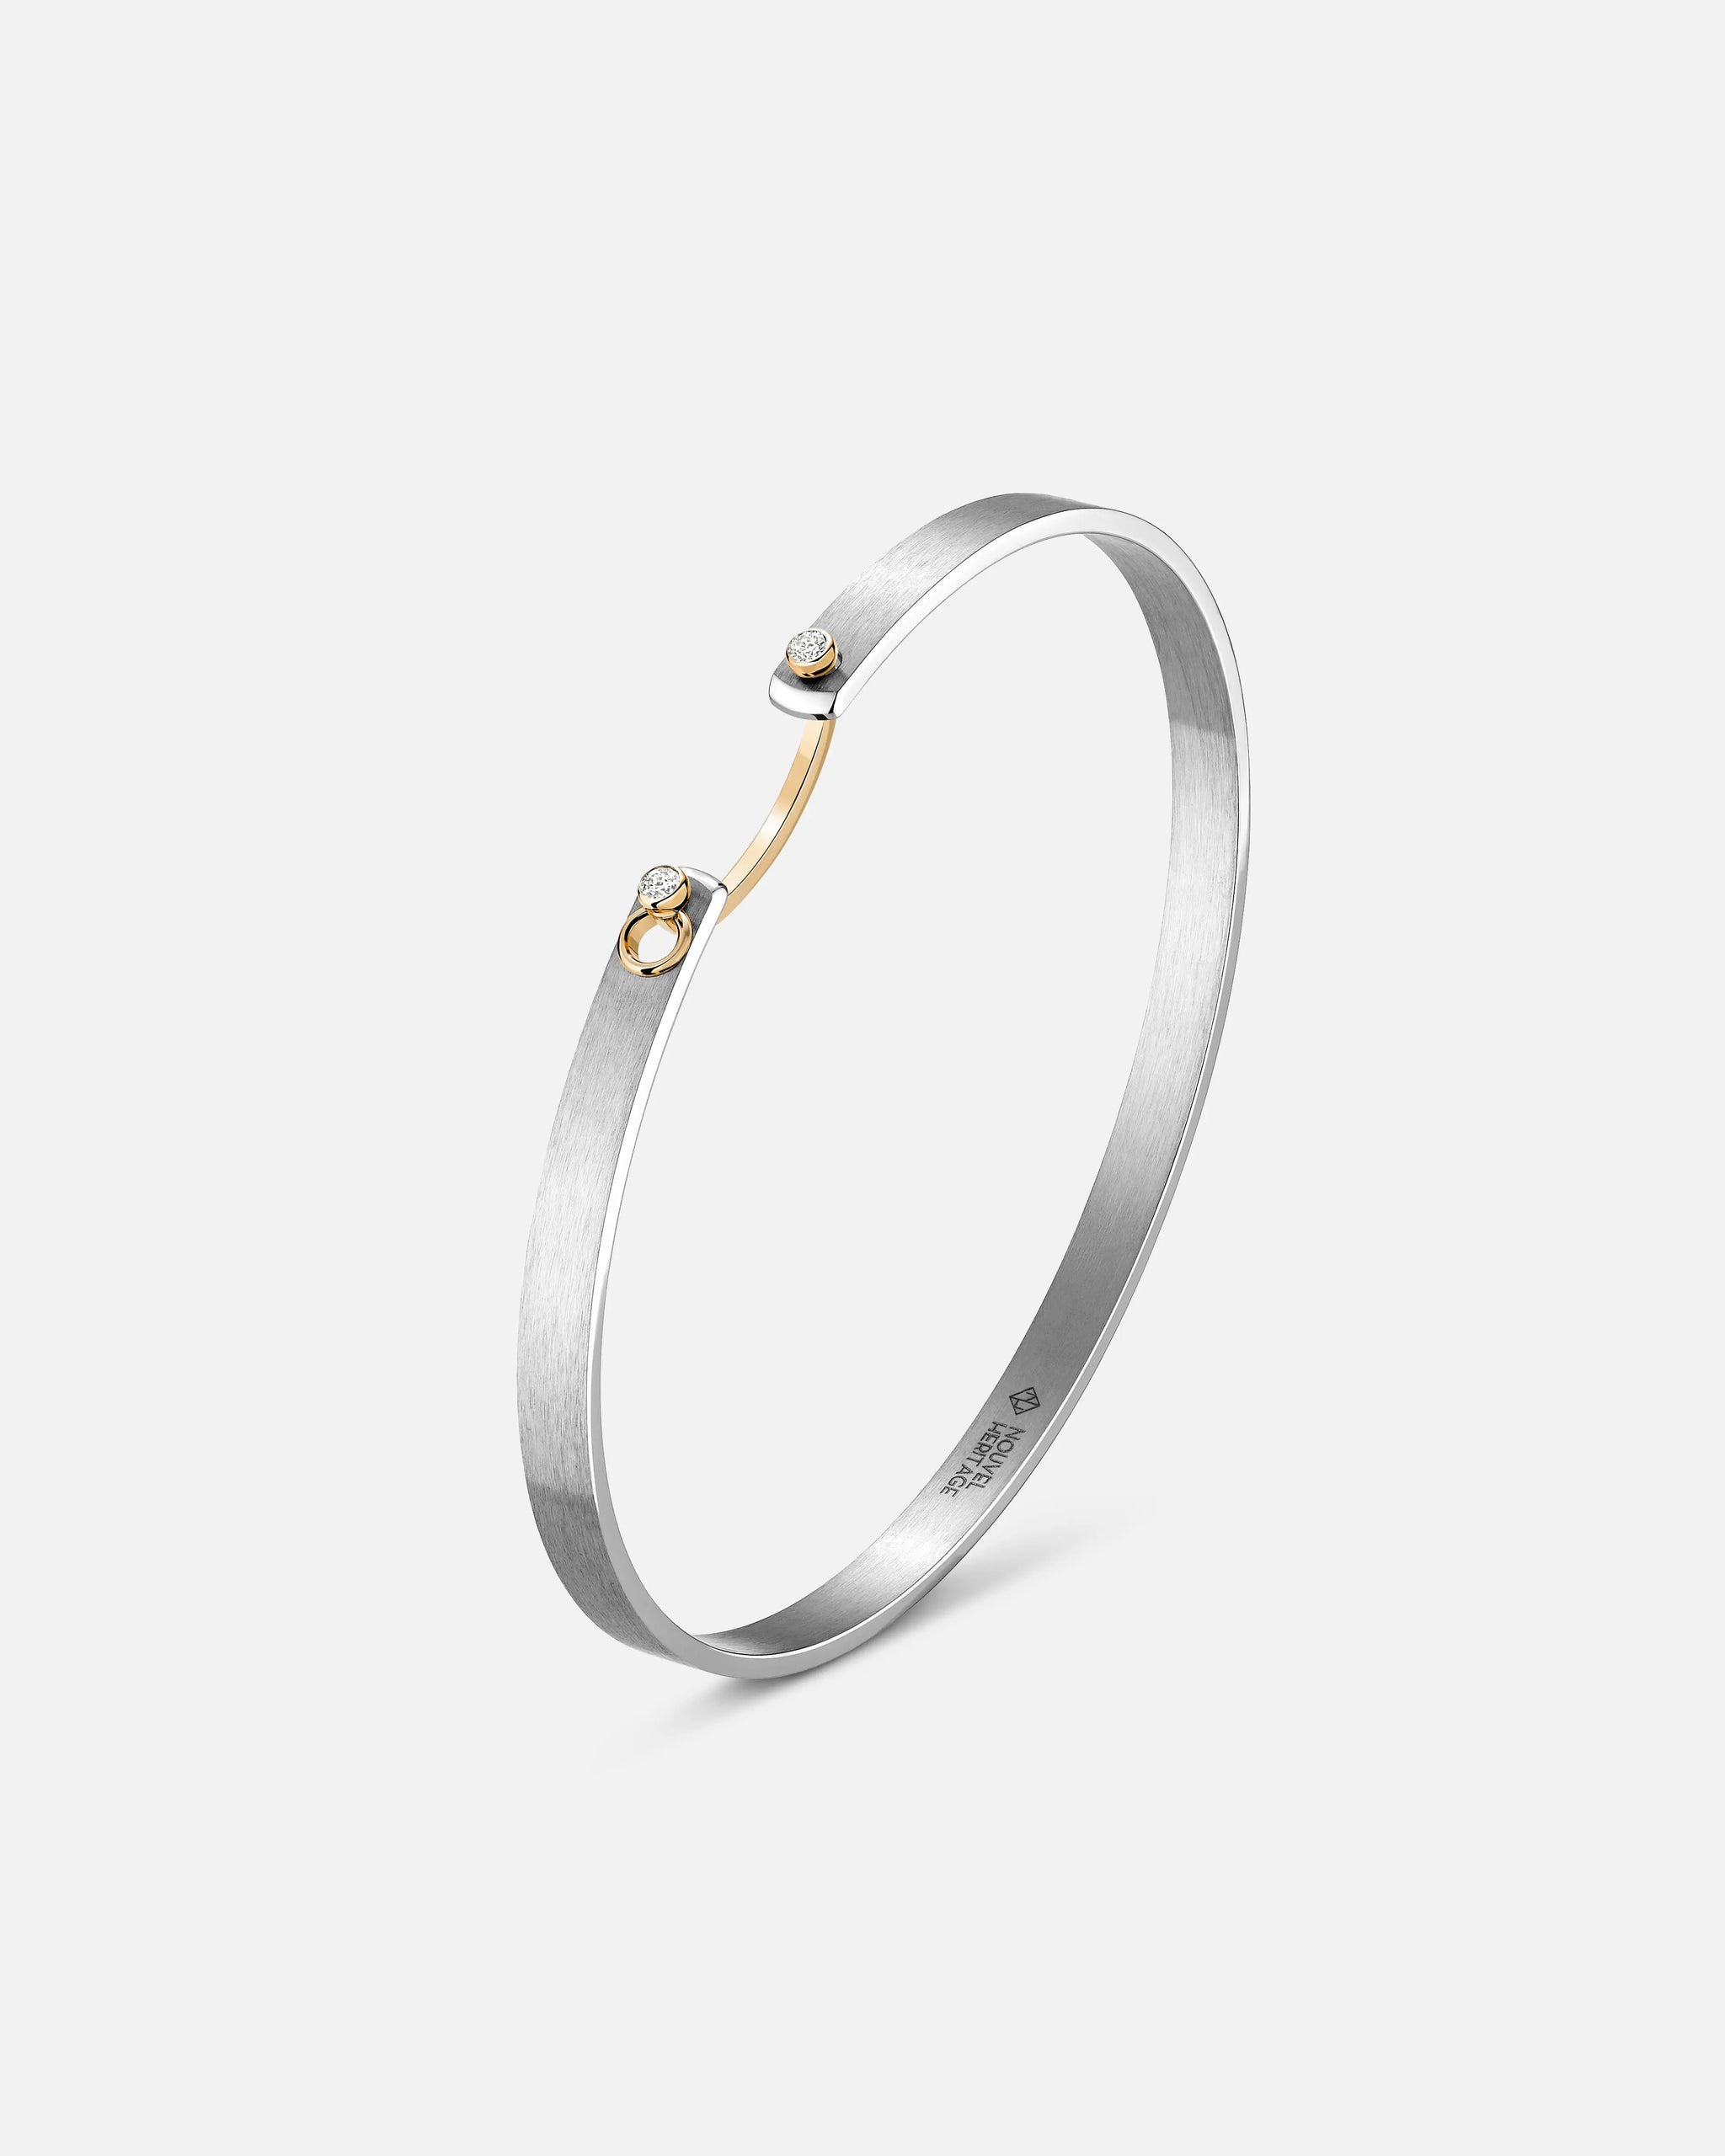 Paris From The Sky Mood Bangle in Yellow Gold - 1 - Nouvel Heritage